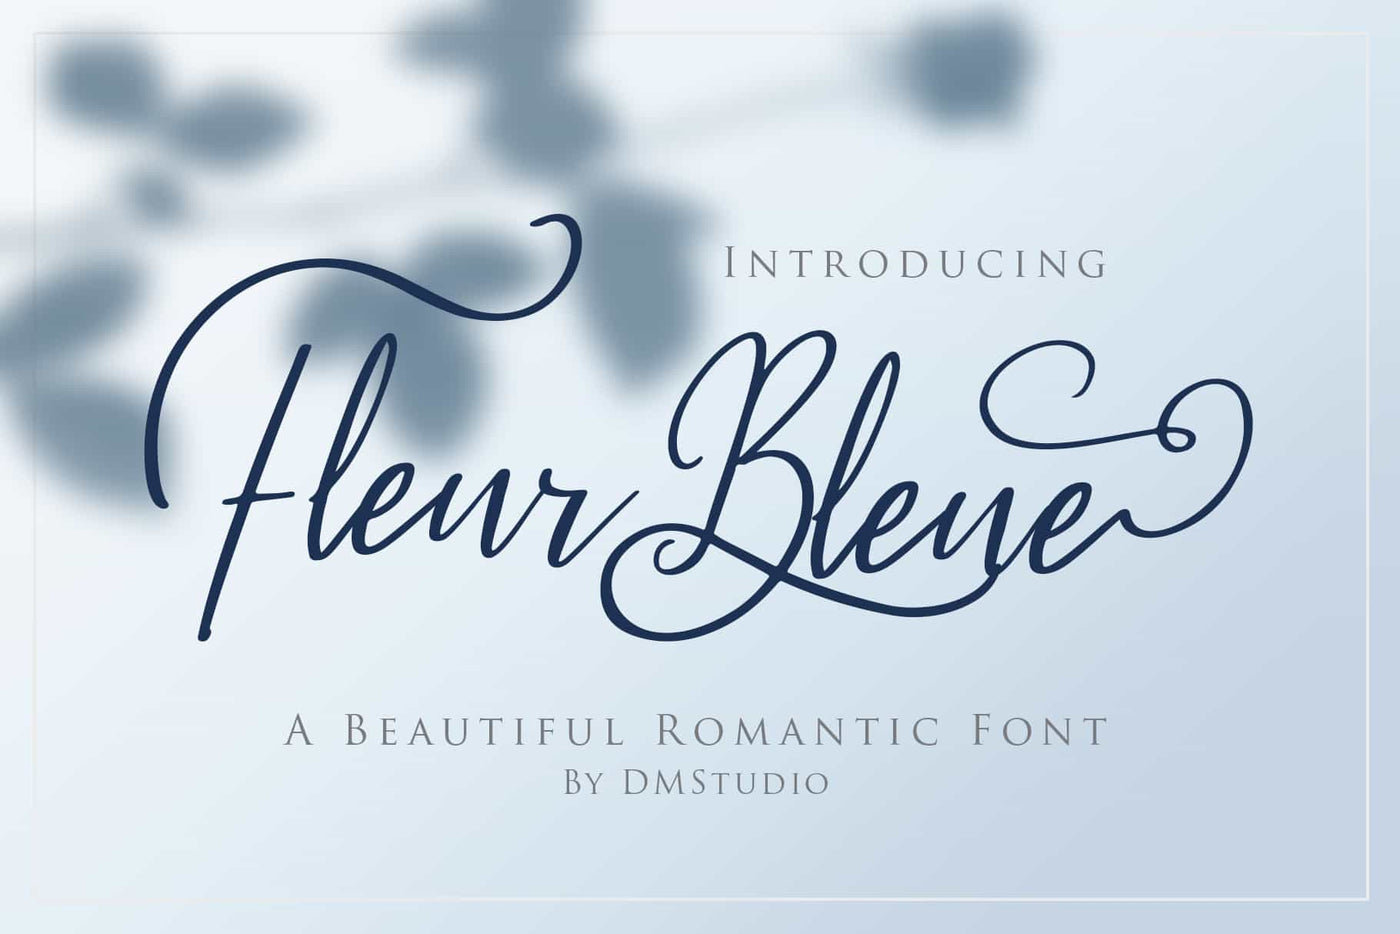 The Crafting Font Collection - 83 Best Selling Fonts - Artixty